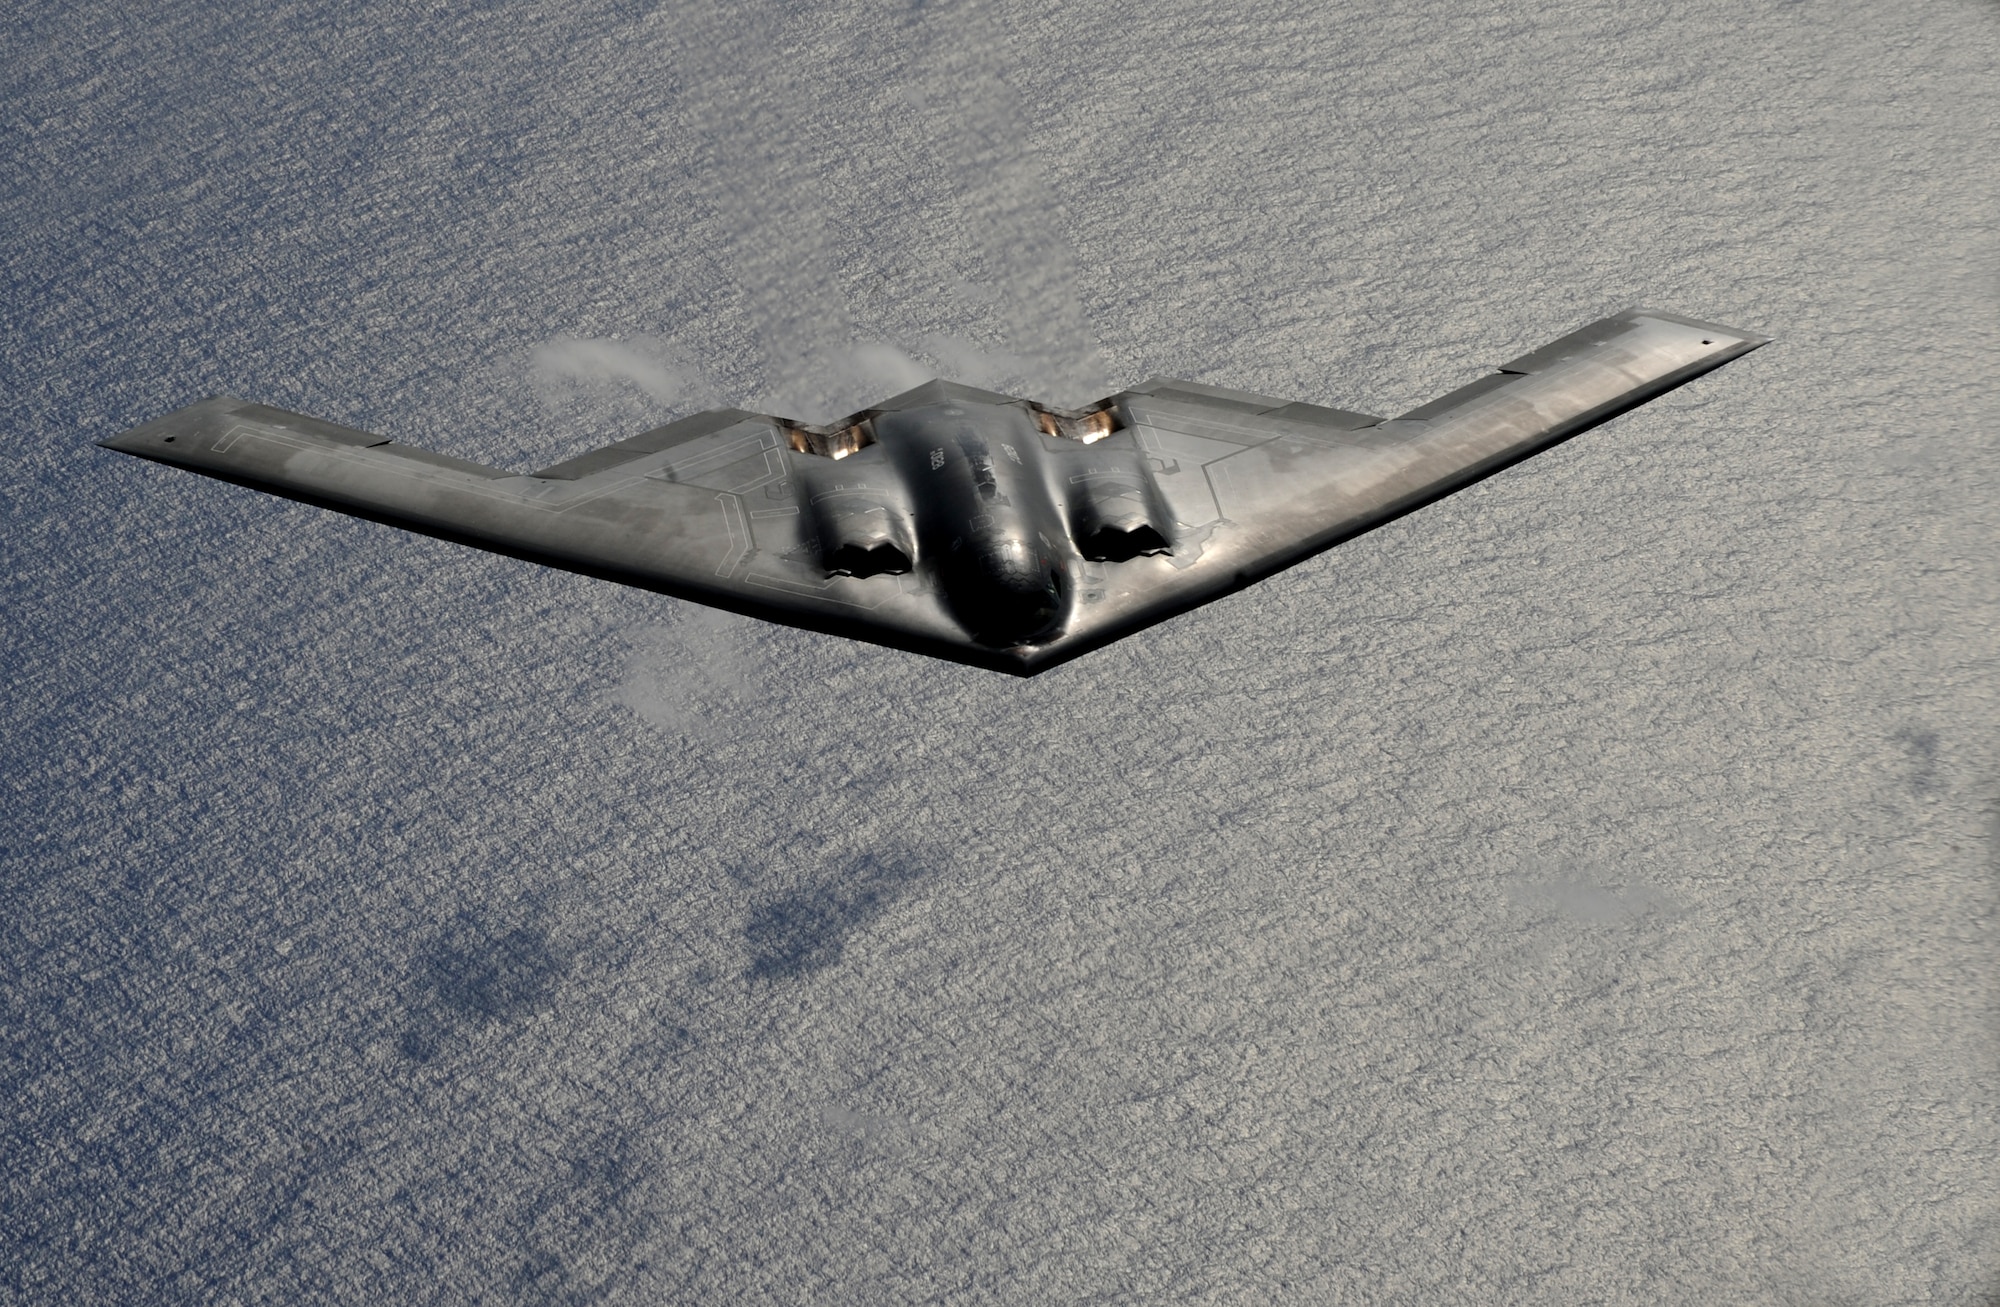 A B-2 Spirit from the 509th Bomb Wing, 13th Bomb Squadron Whiteman Air Force Base, Mo., flies over the Pacific Ocean during a mission exercise. The long-range, strategic bombers are part of the continuous rotating bomber presence deployed to Andersen Air Force Base, Guam. The rotating bomber units promote security and stability in the region as well as provide unique aircrew training opportunities.(U.S. Air Force photo/ Master Sgt. Kevin J. Gruenwald) released      